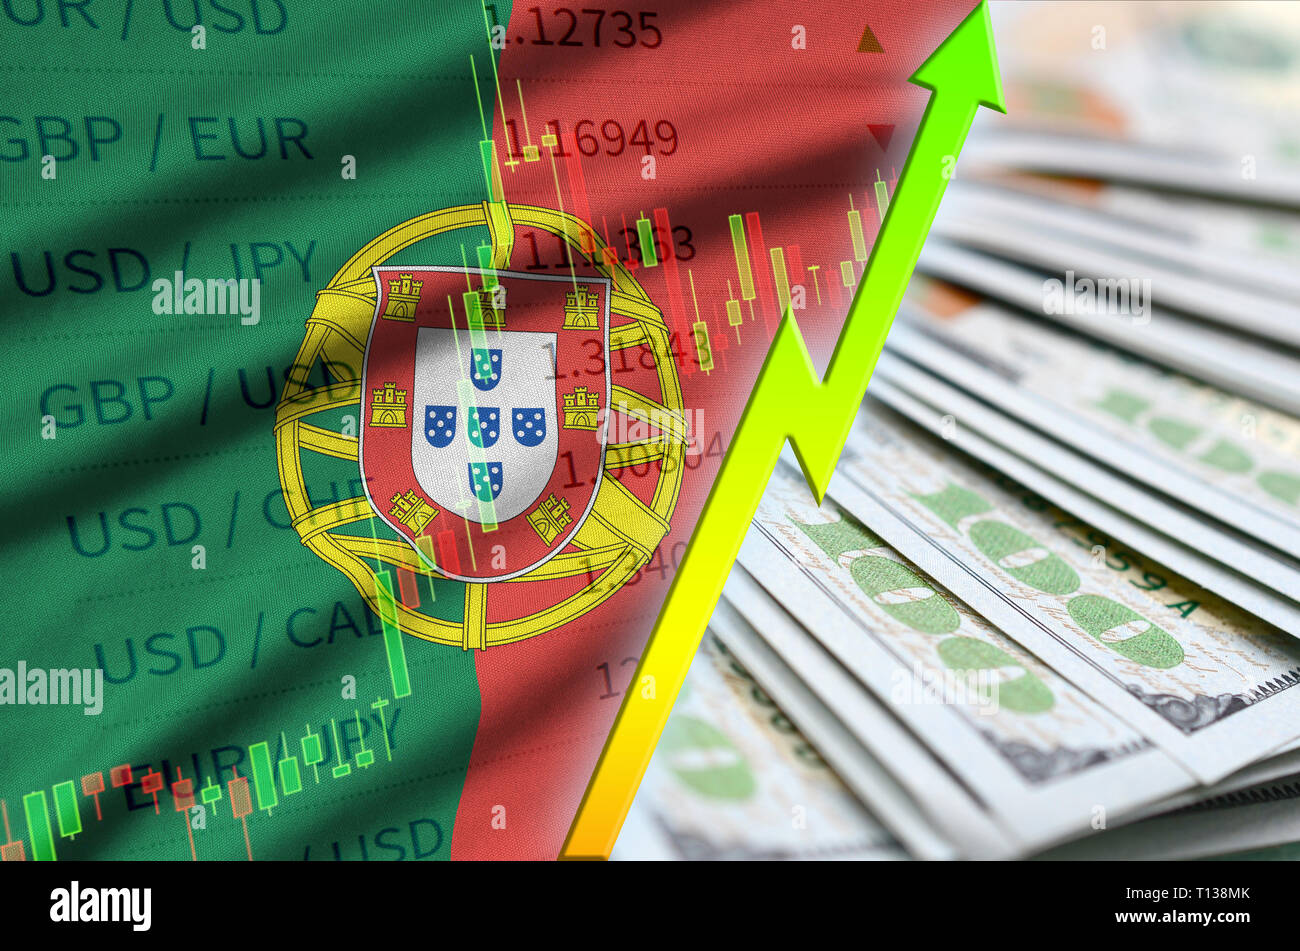 Portugal flag and chart growing US dollar position with a fan of dollar bills. Concept of increasing value of US dollar currency Stock Photo